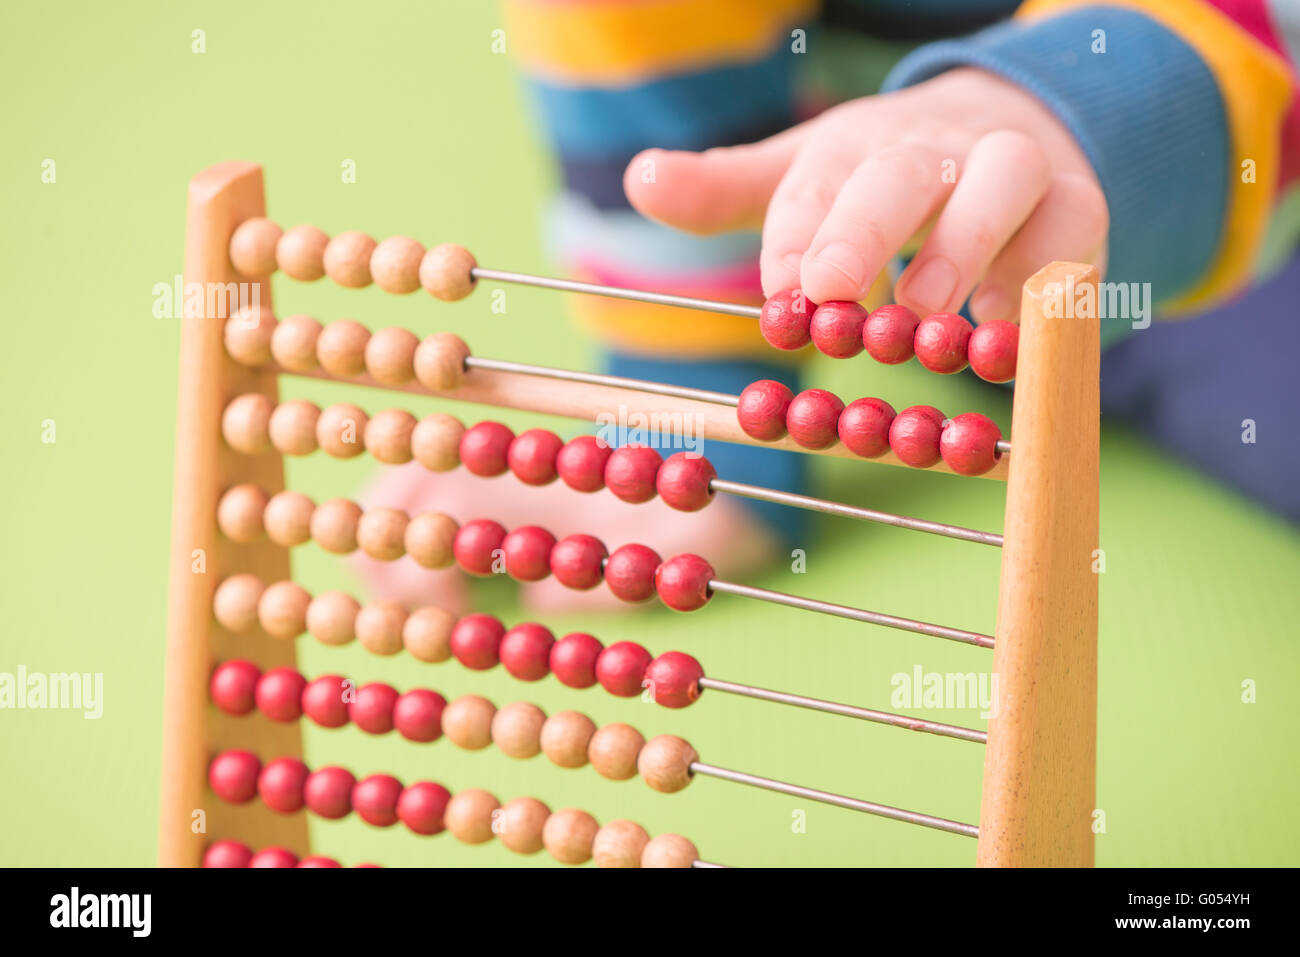 Child hand counting on abacus. Concept of childhood learning, mathematics and early education. Stock Photo